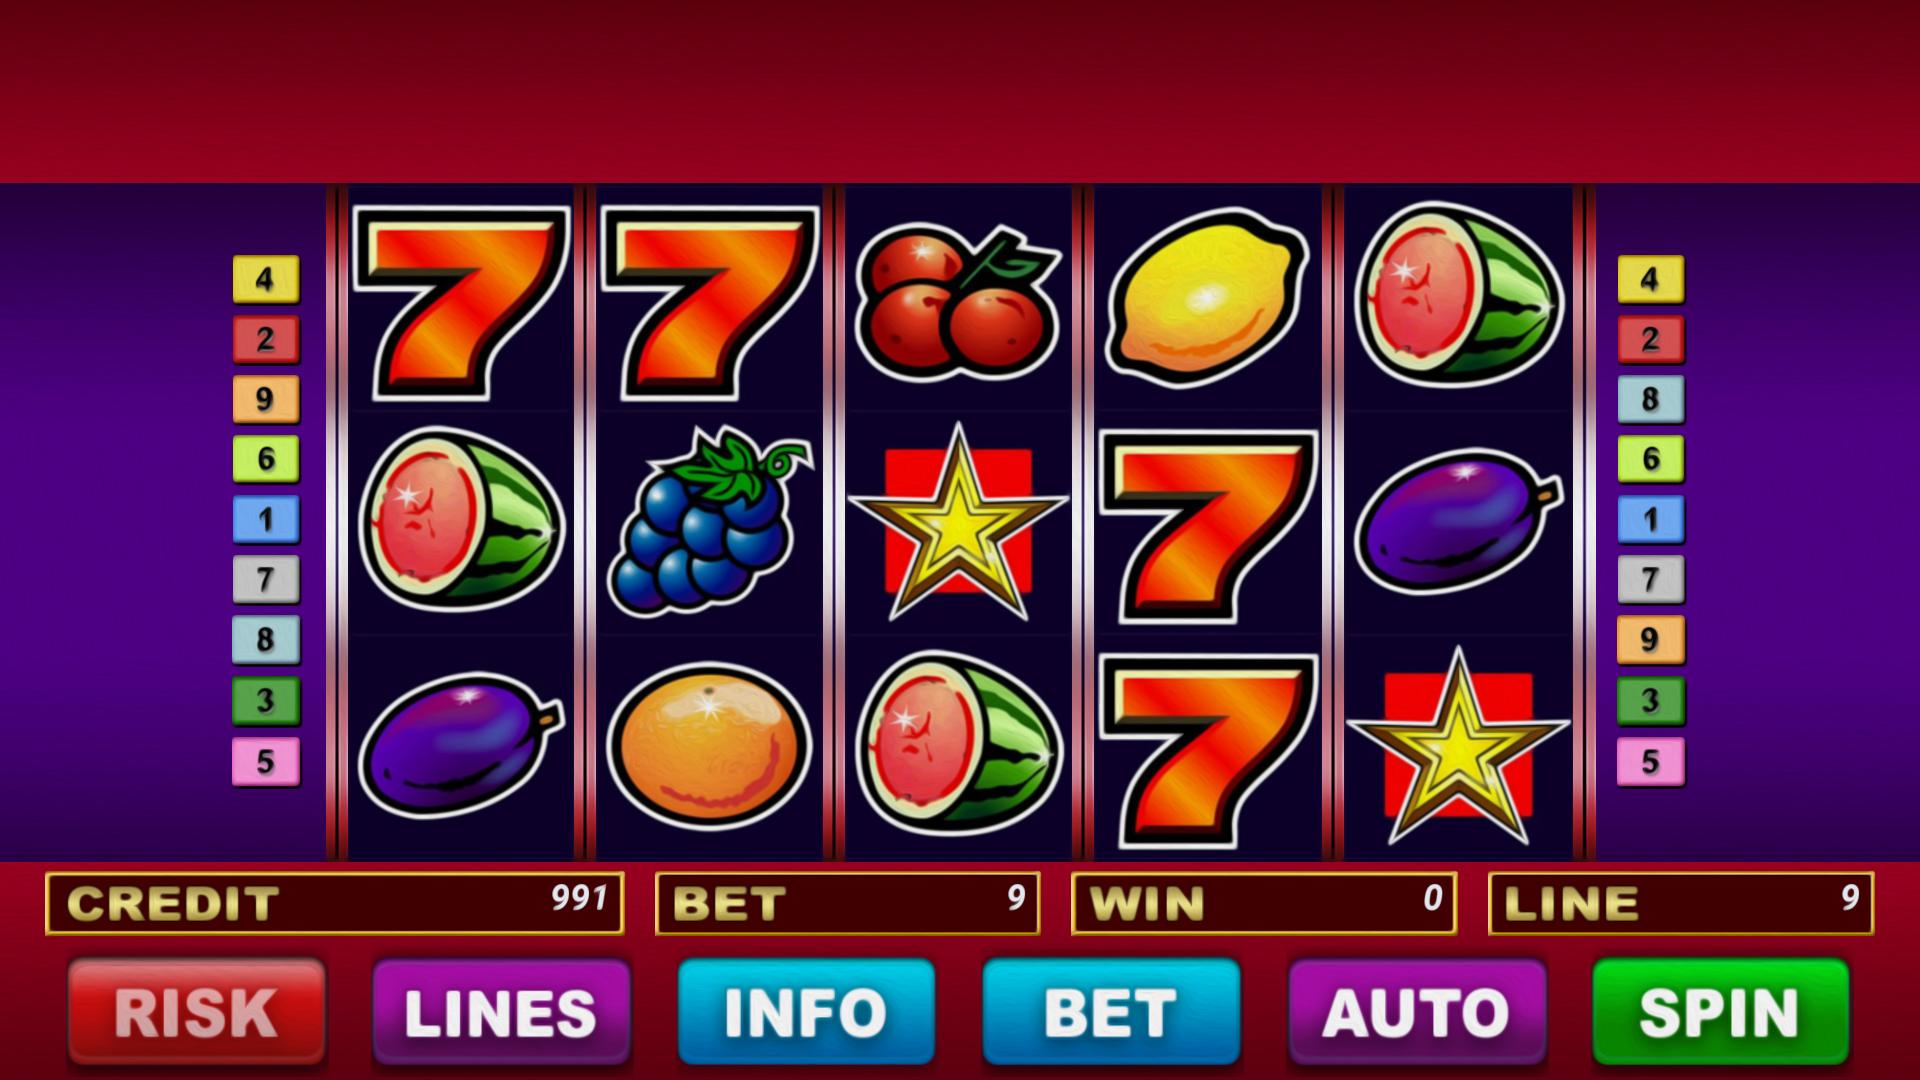 Extra chilli epic spins. Extra win слоты. Sizzling hot. Sizzling hot на андроид. Hot Slots.